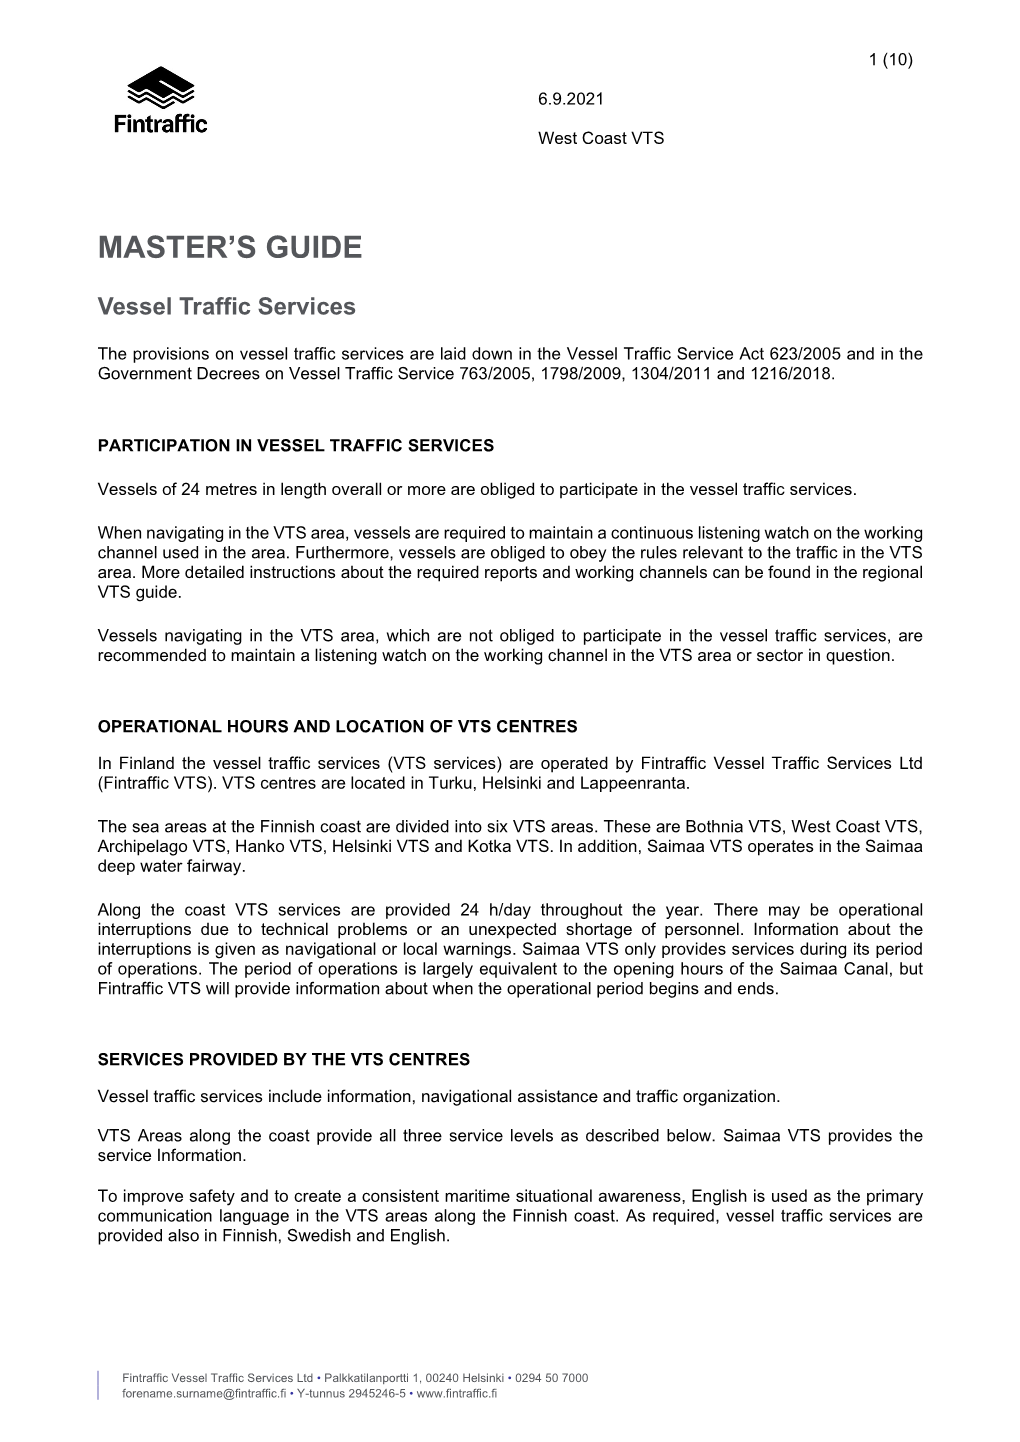 Master's Guide